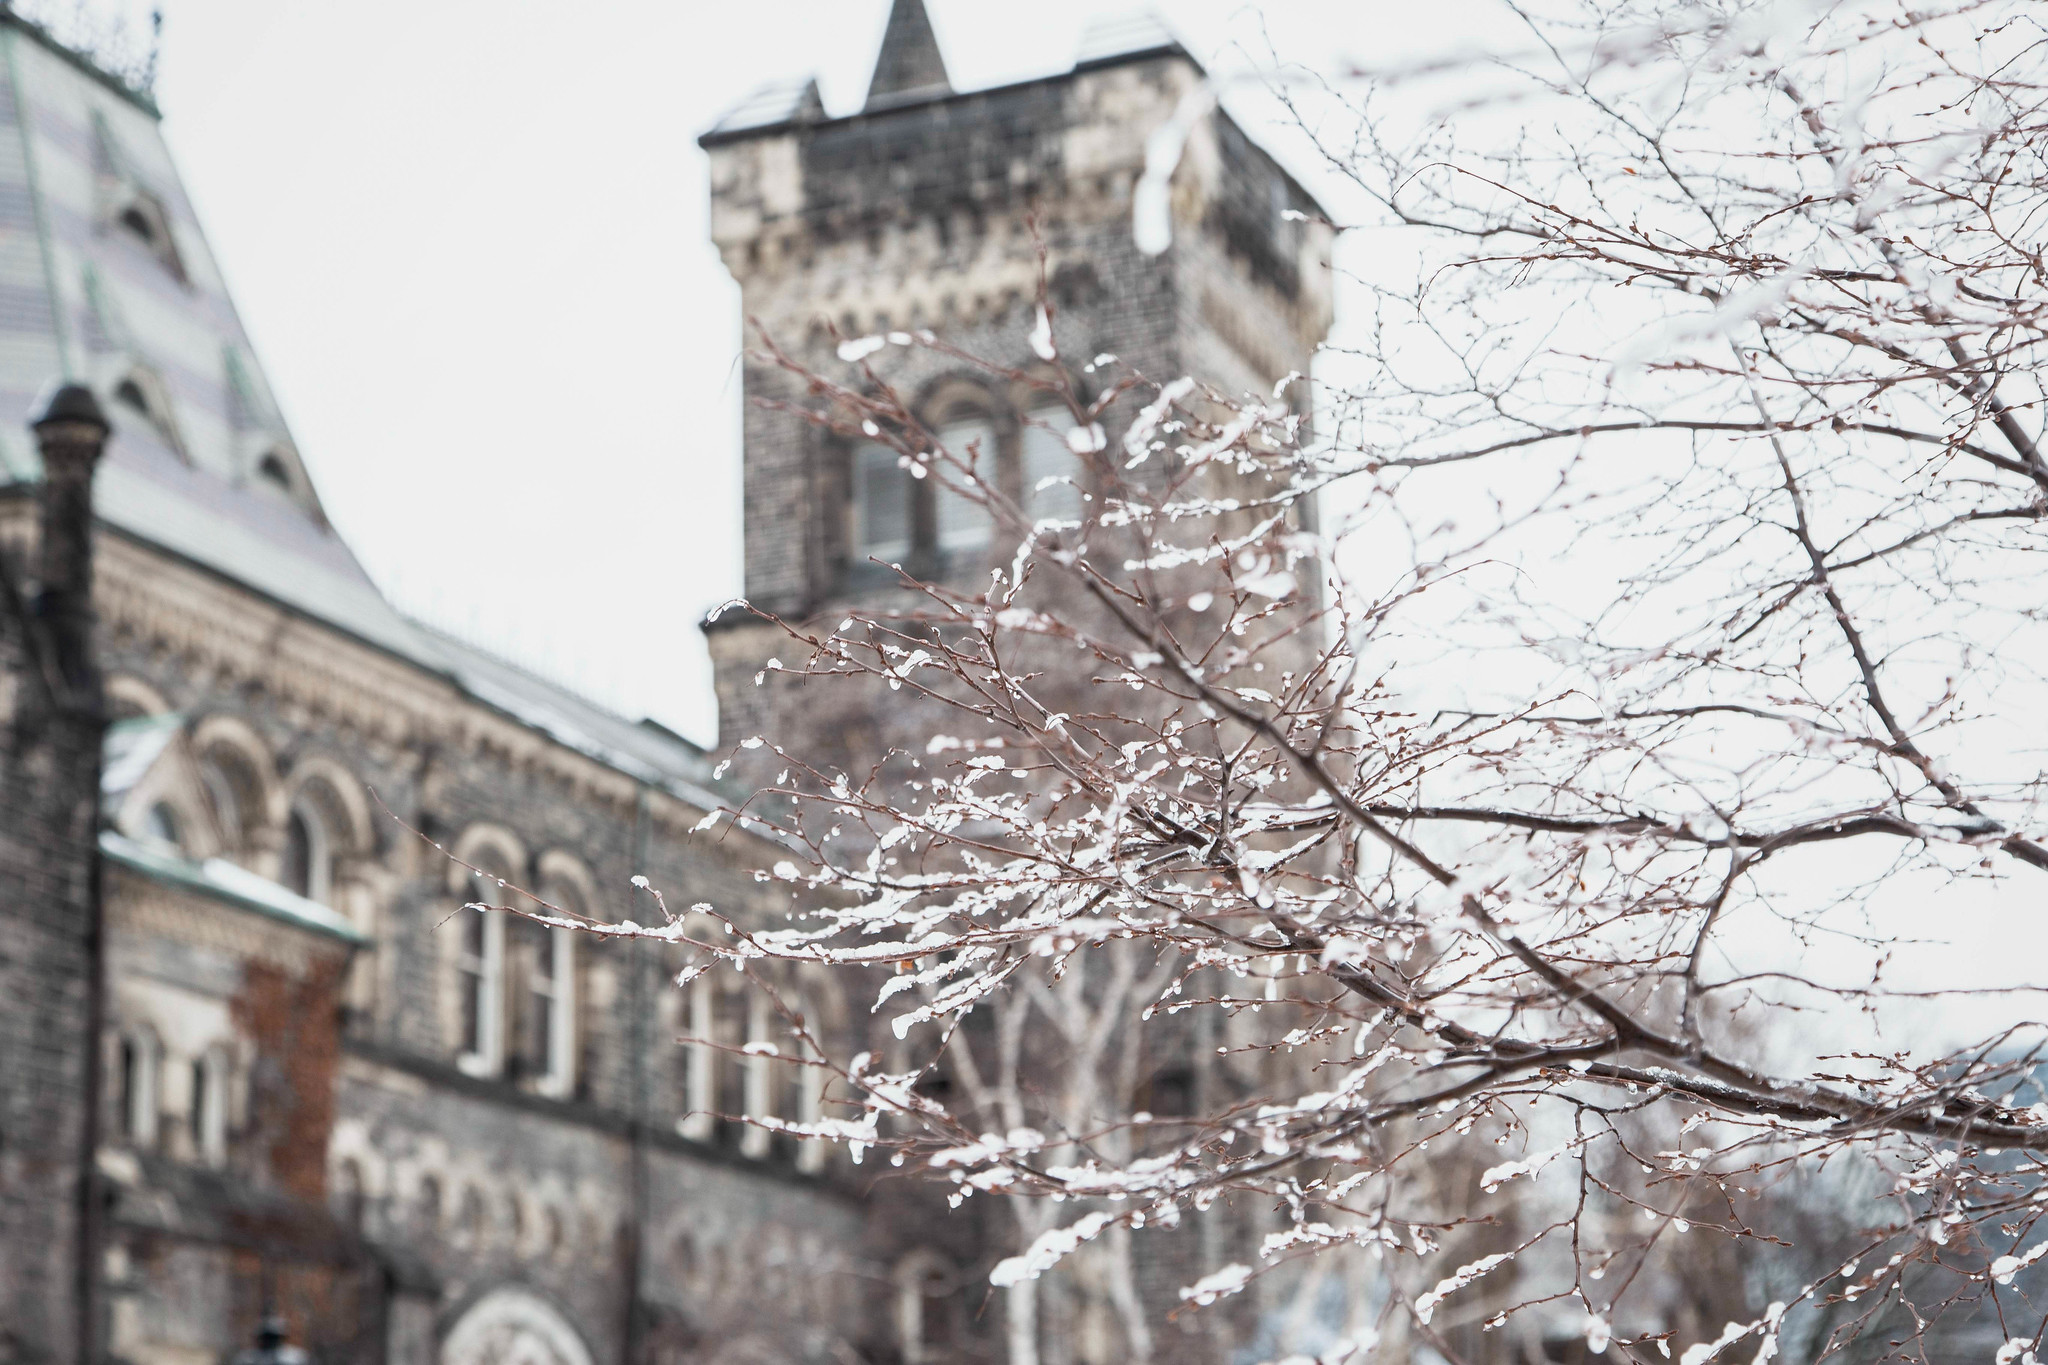 Image focuses on a tree branch covered with snow. University College is in the background.